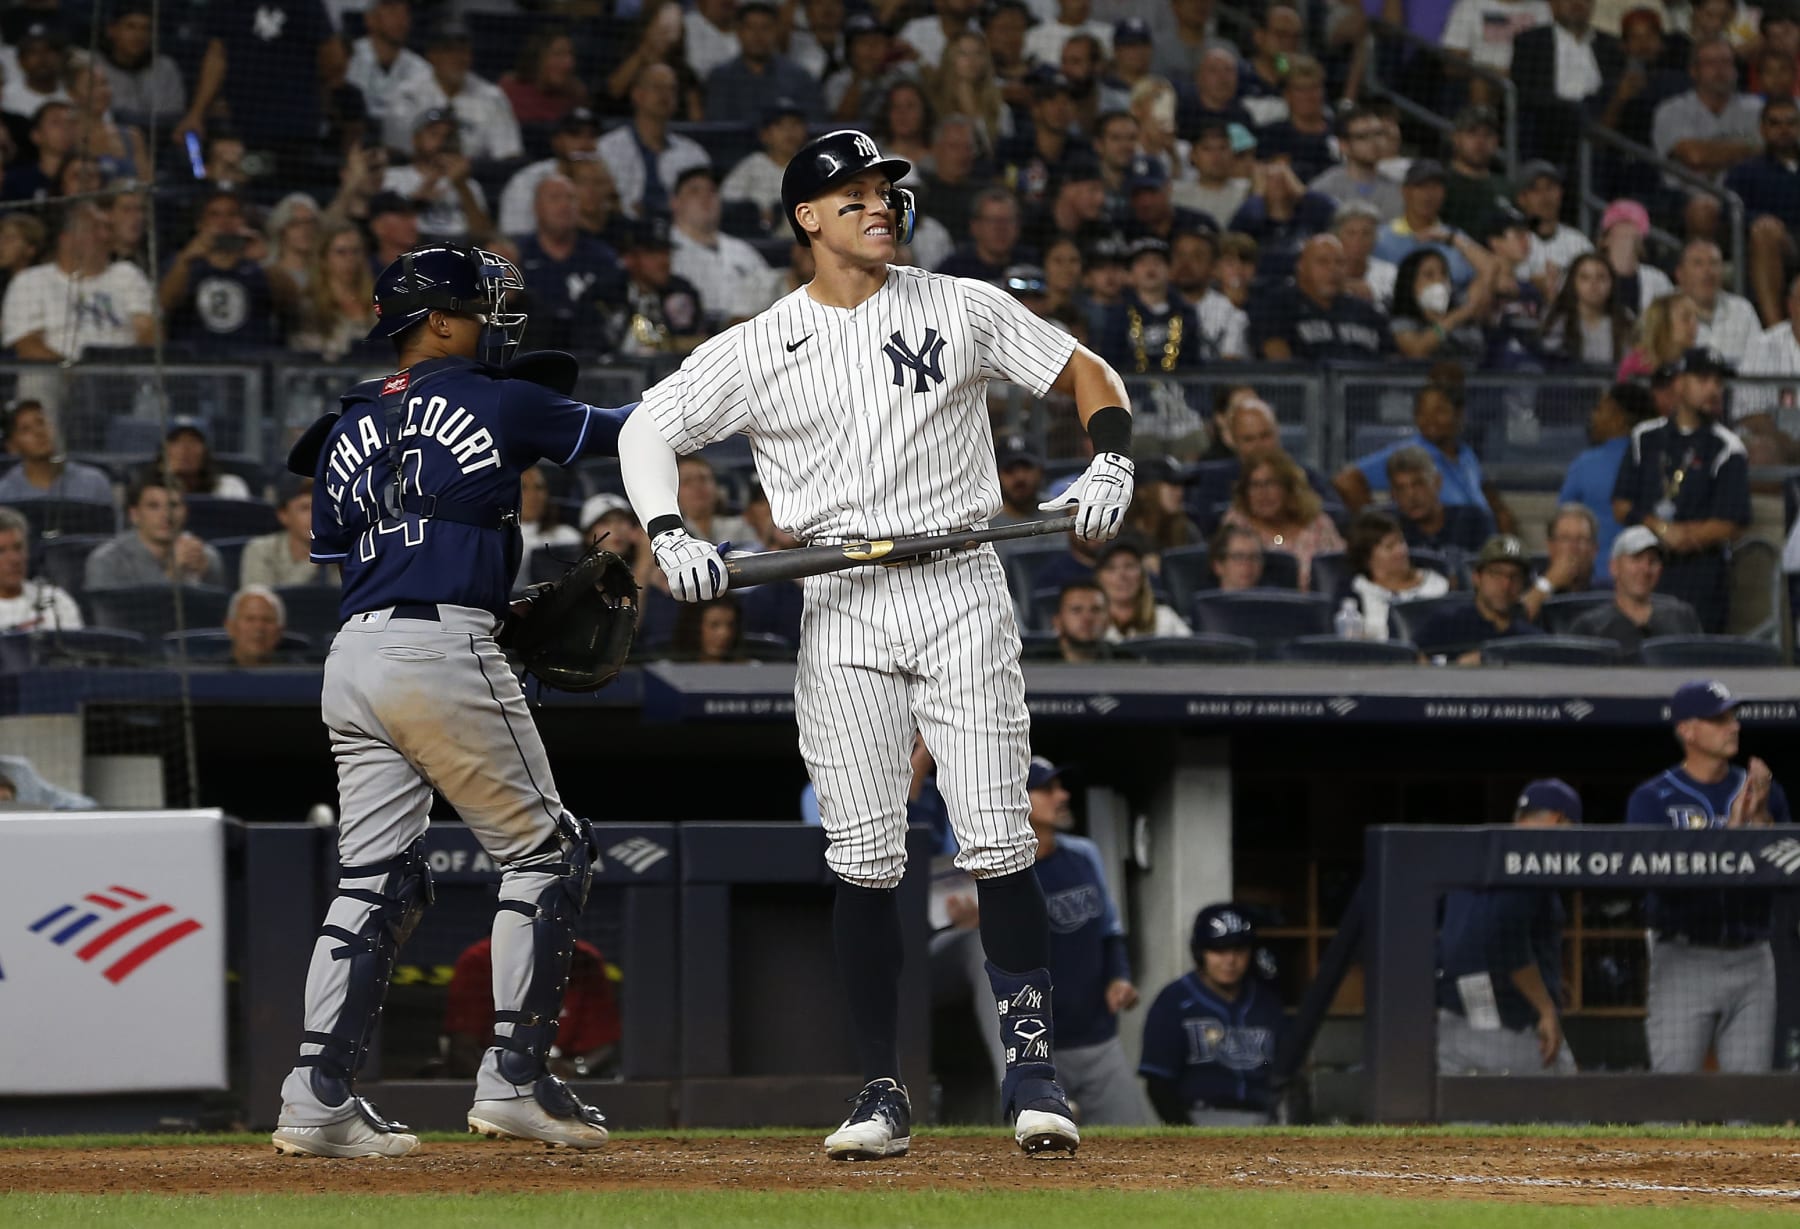 Buying or Selling the Yankees as World Series Contenders After Red